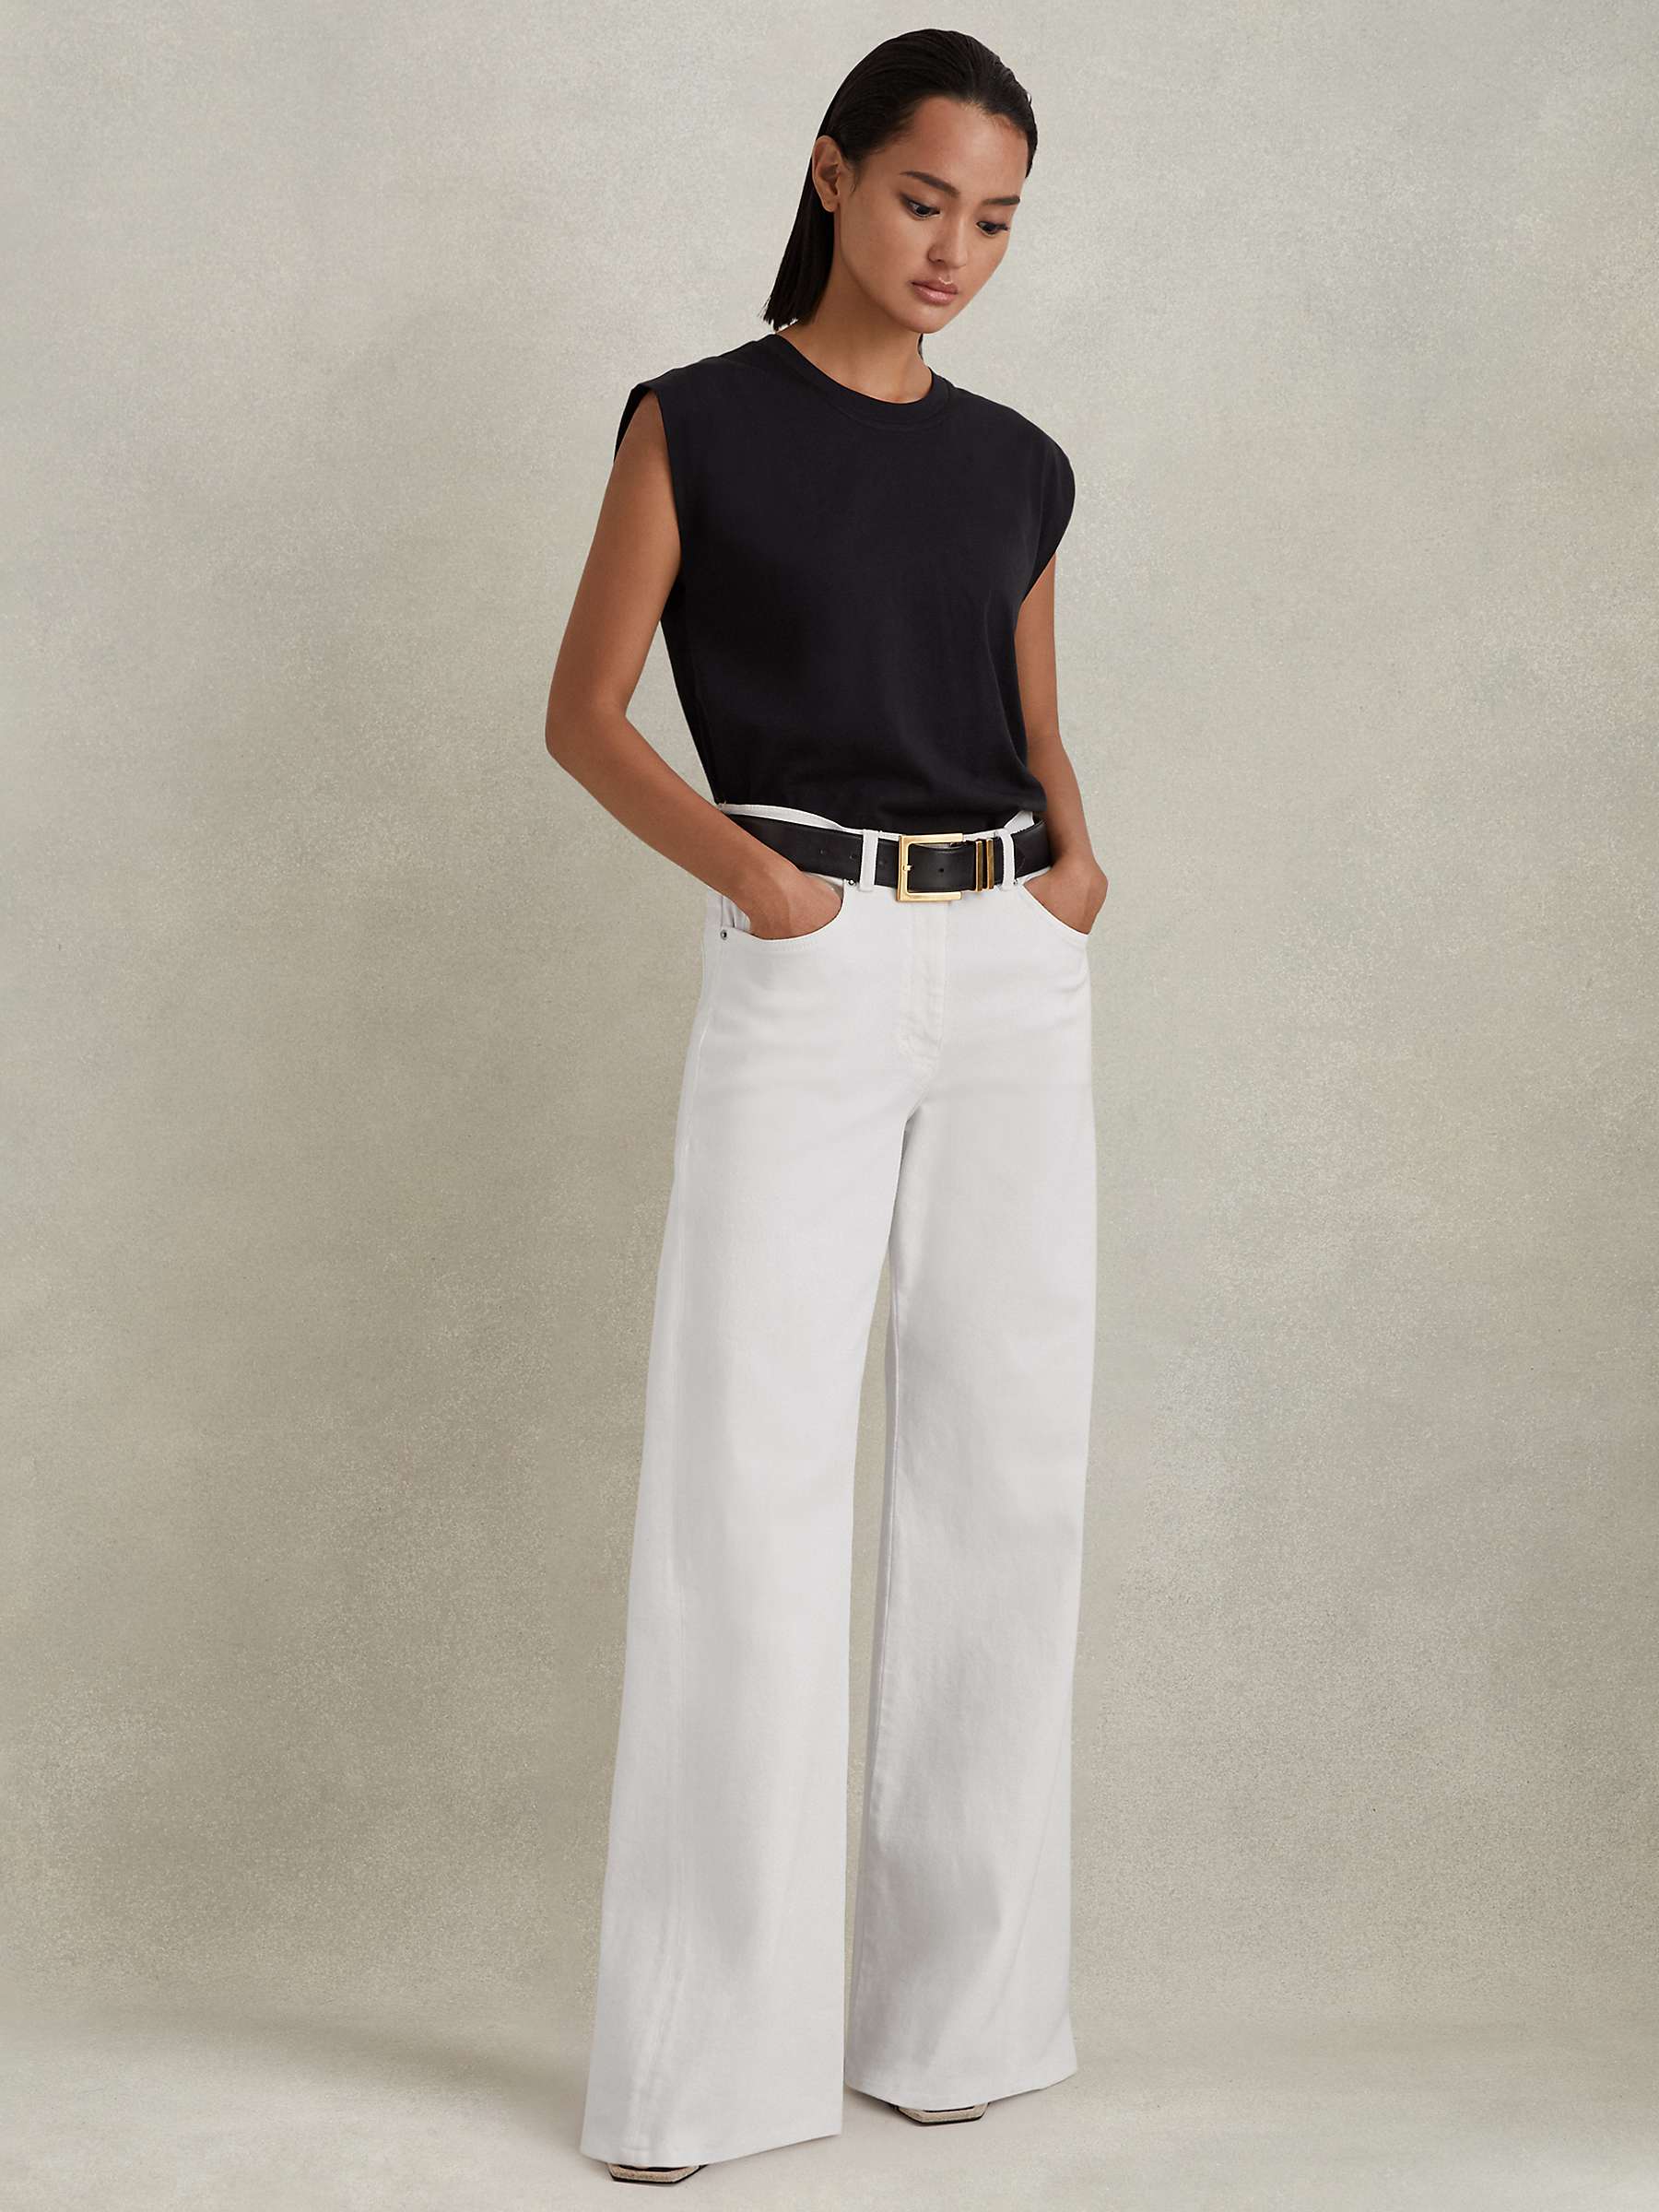 Buy Reiss Maize Wide Leg Jeans, White Online at johnlewis.com